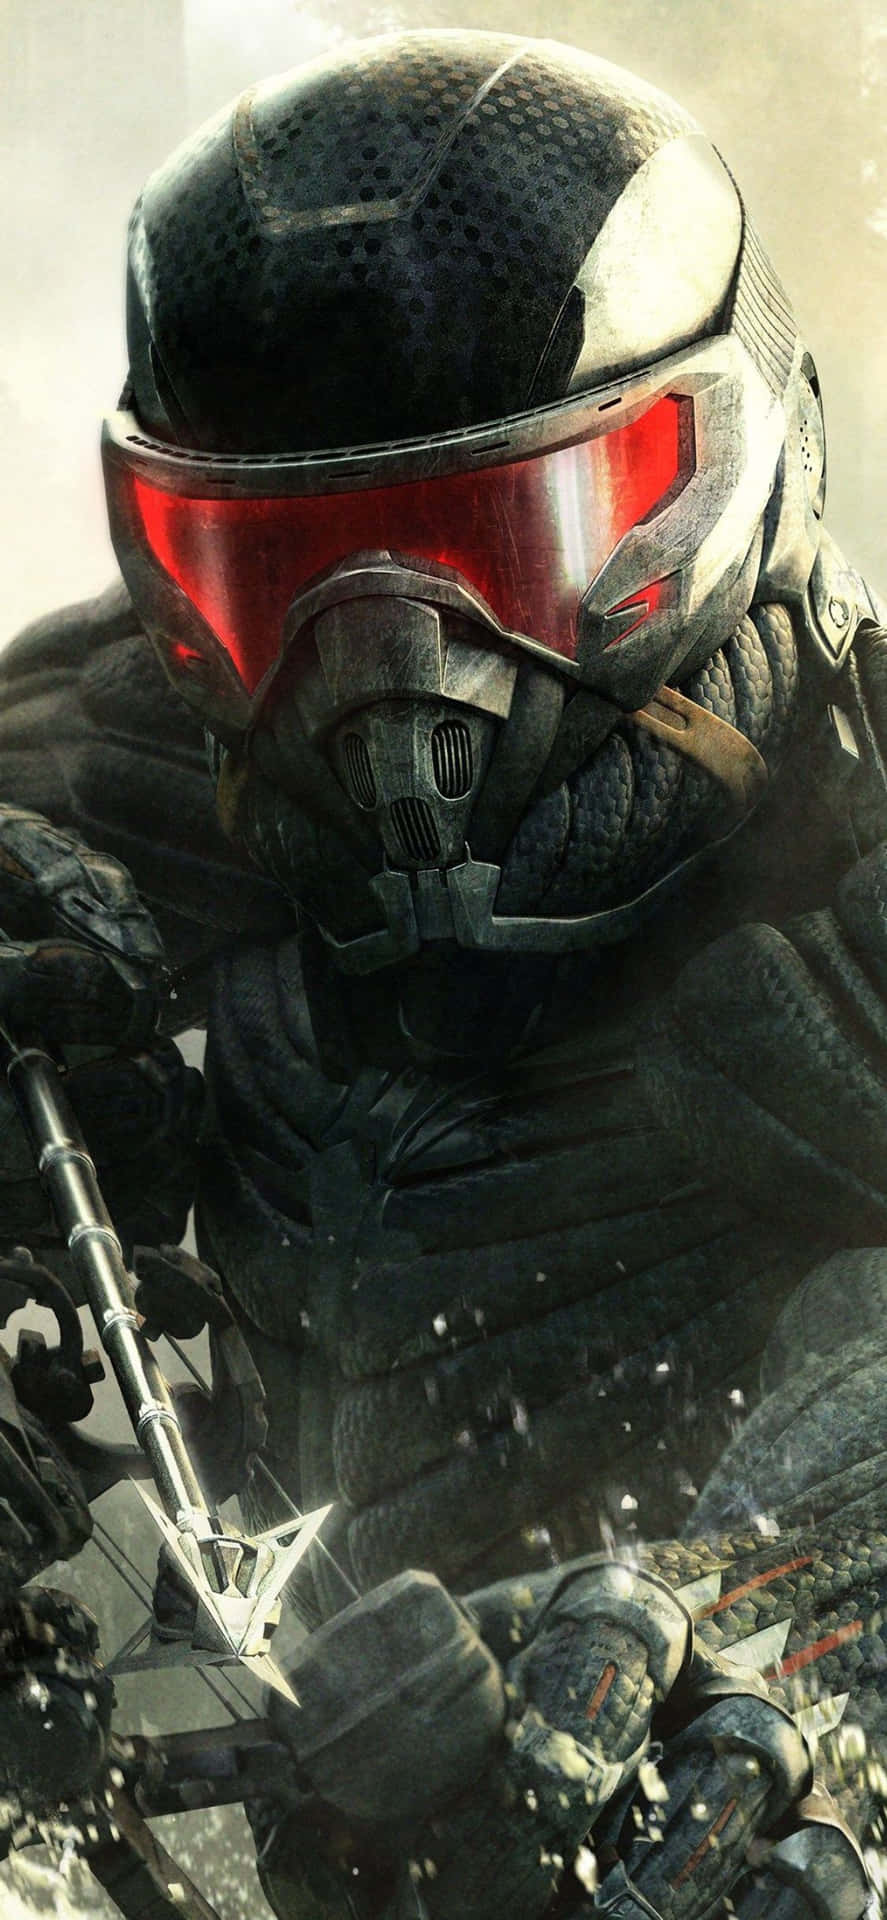 Play Crysis 3 on Your iPhone X